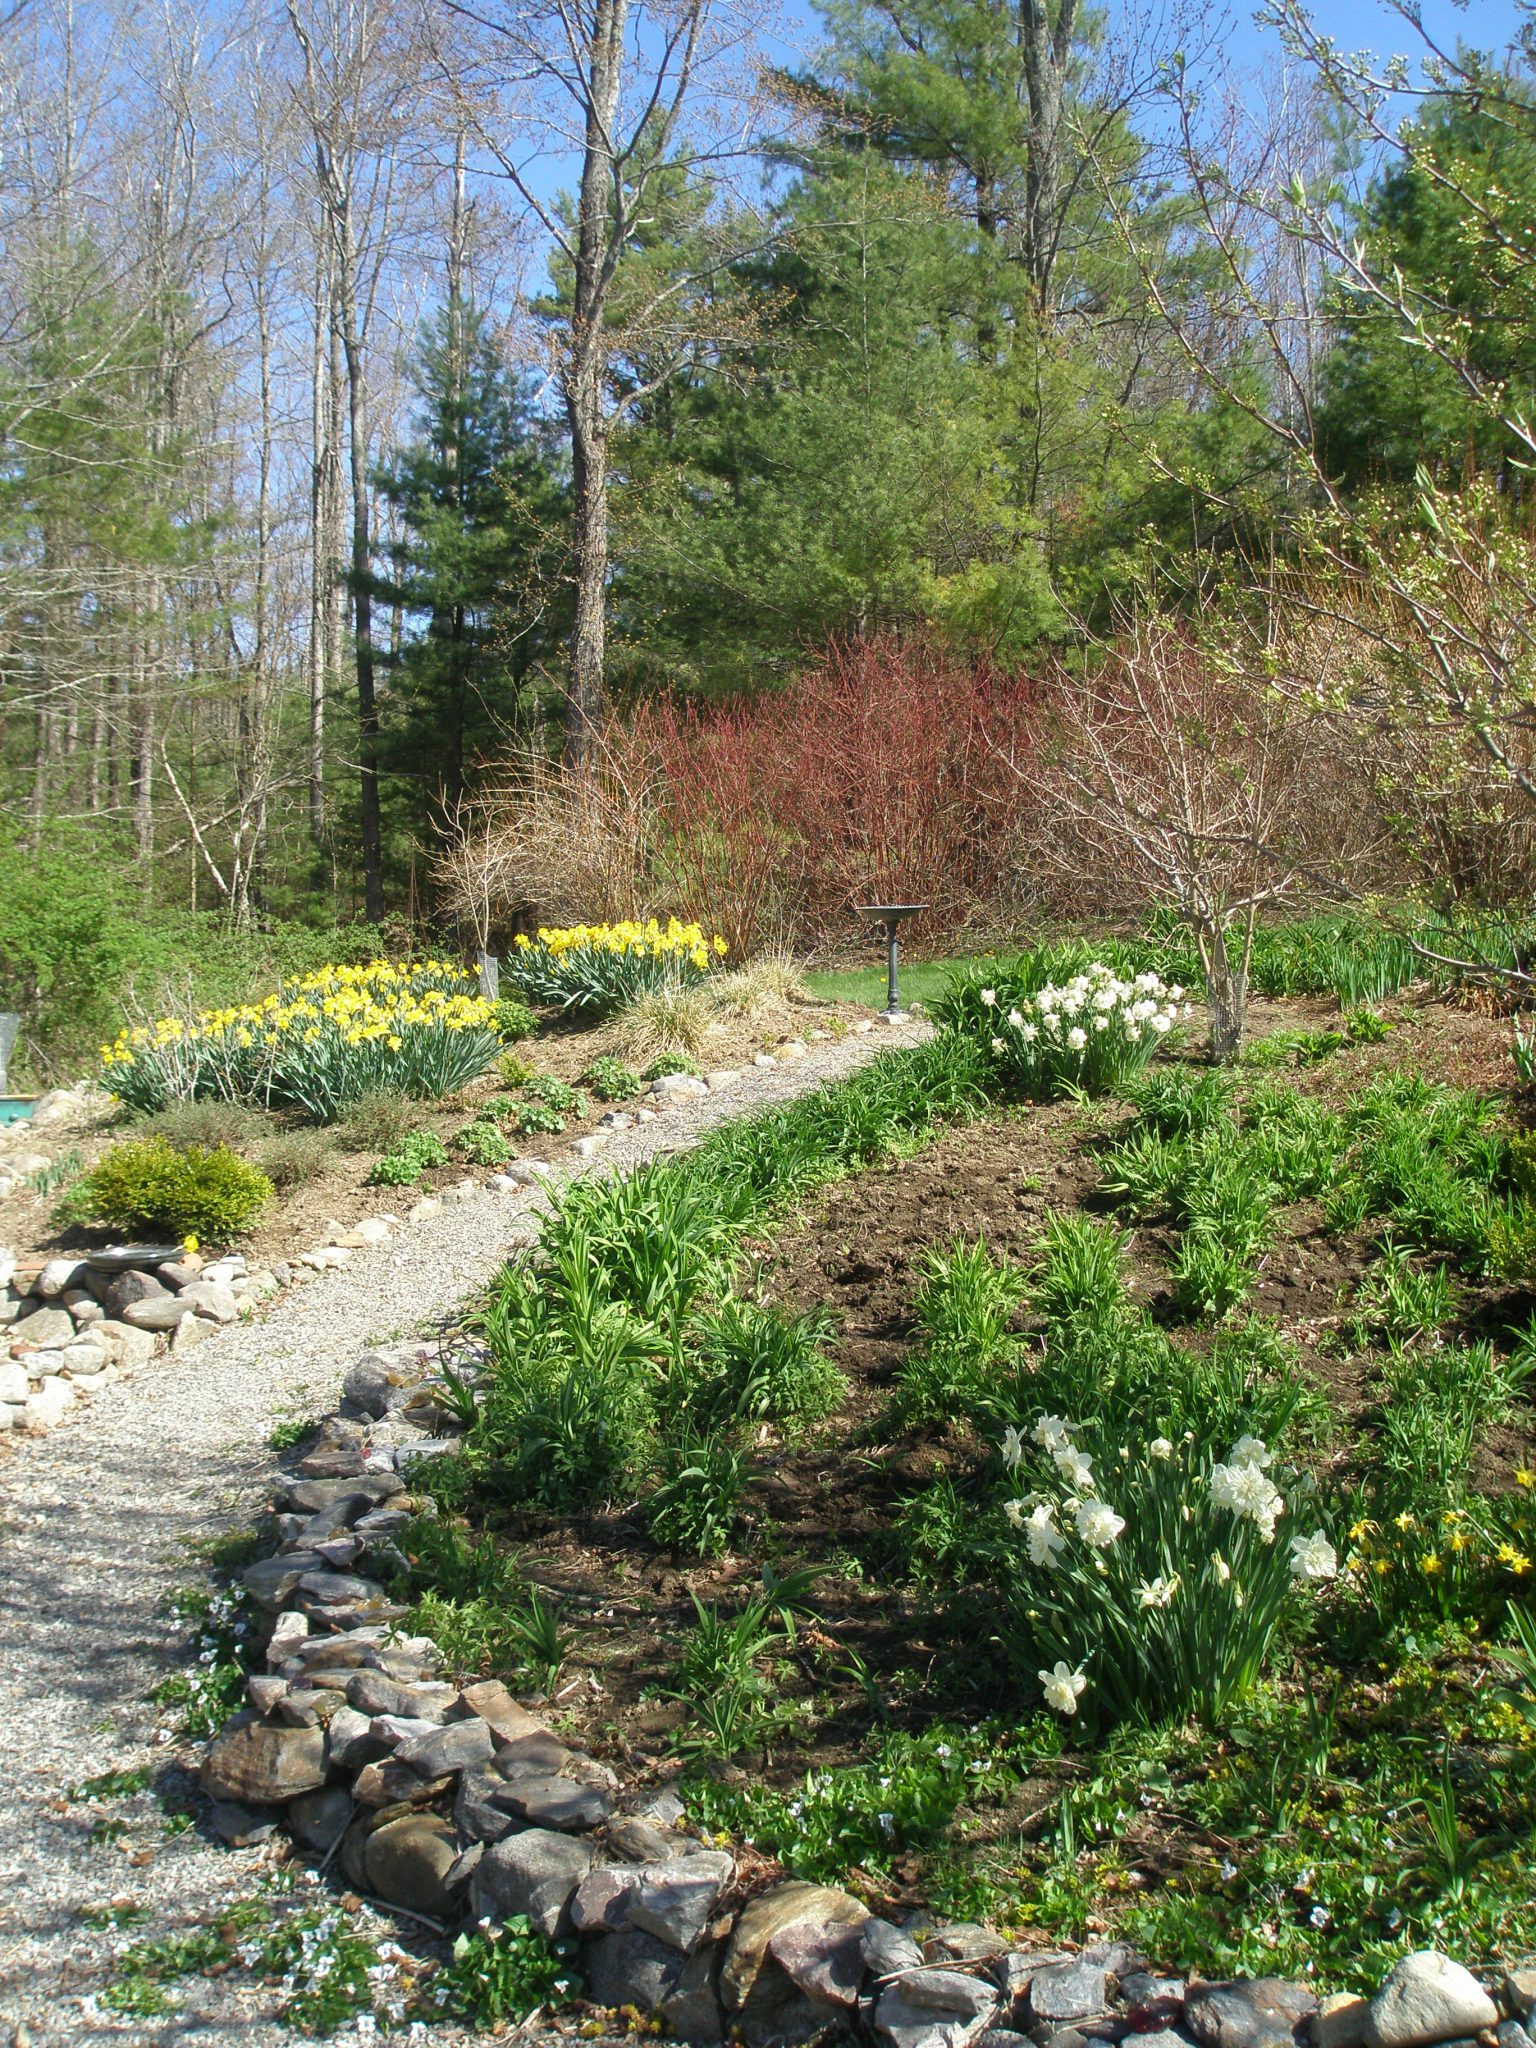 The path between the Daylily beds, and the summer cutting flower beds.